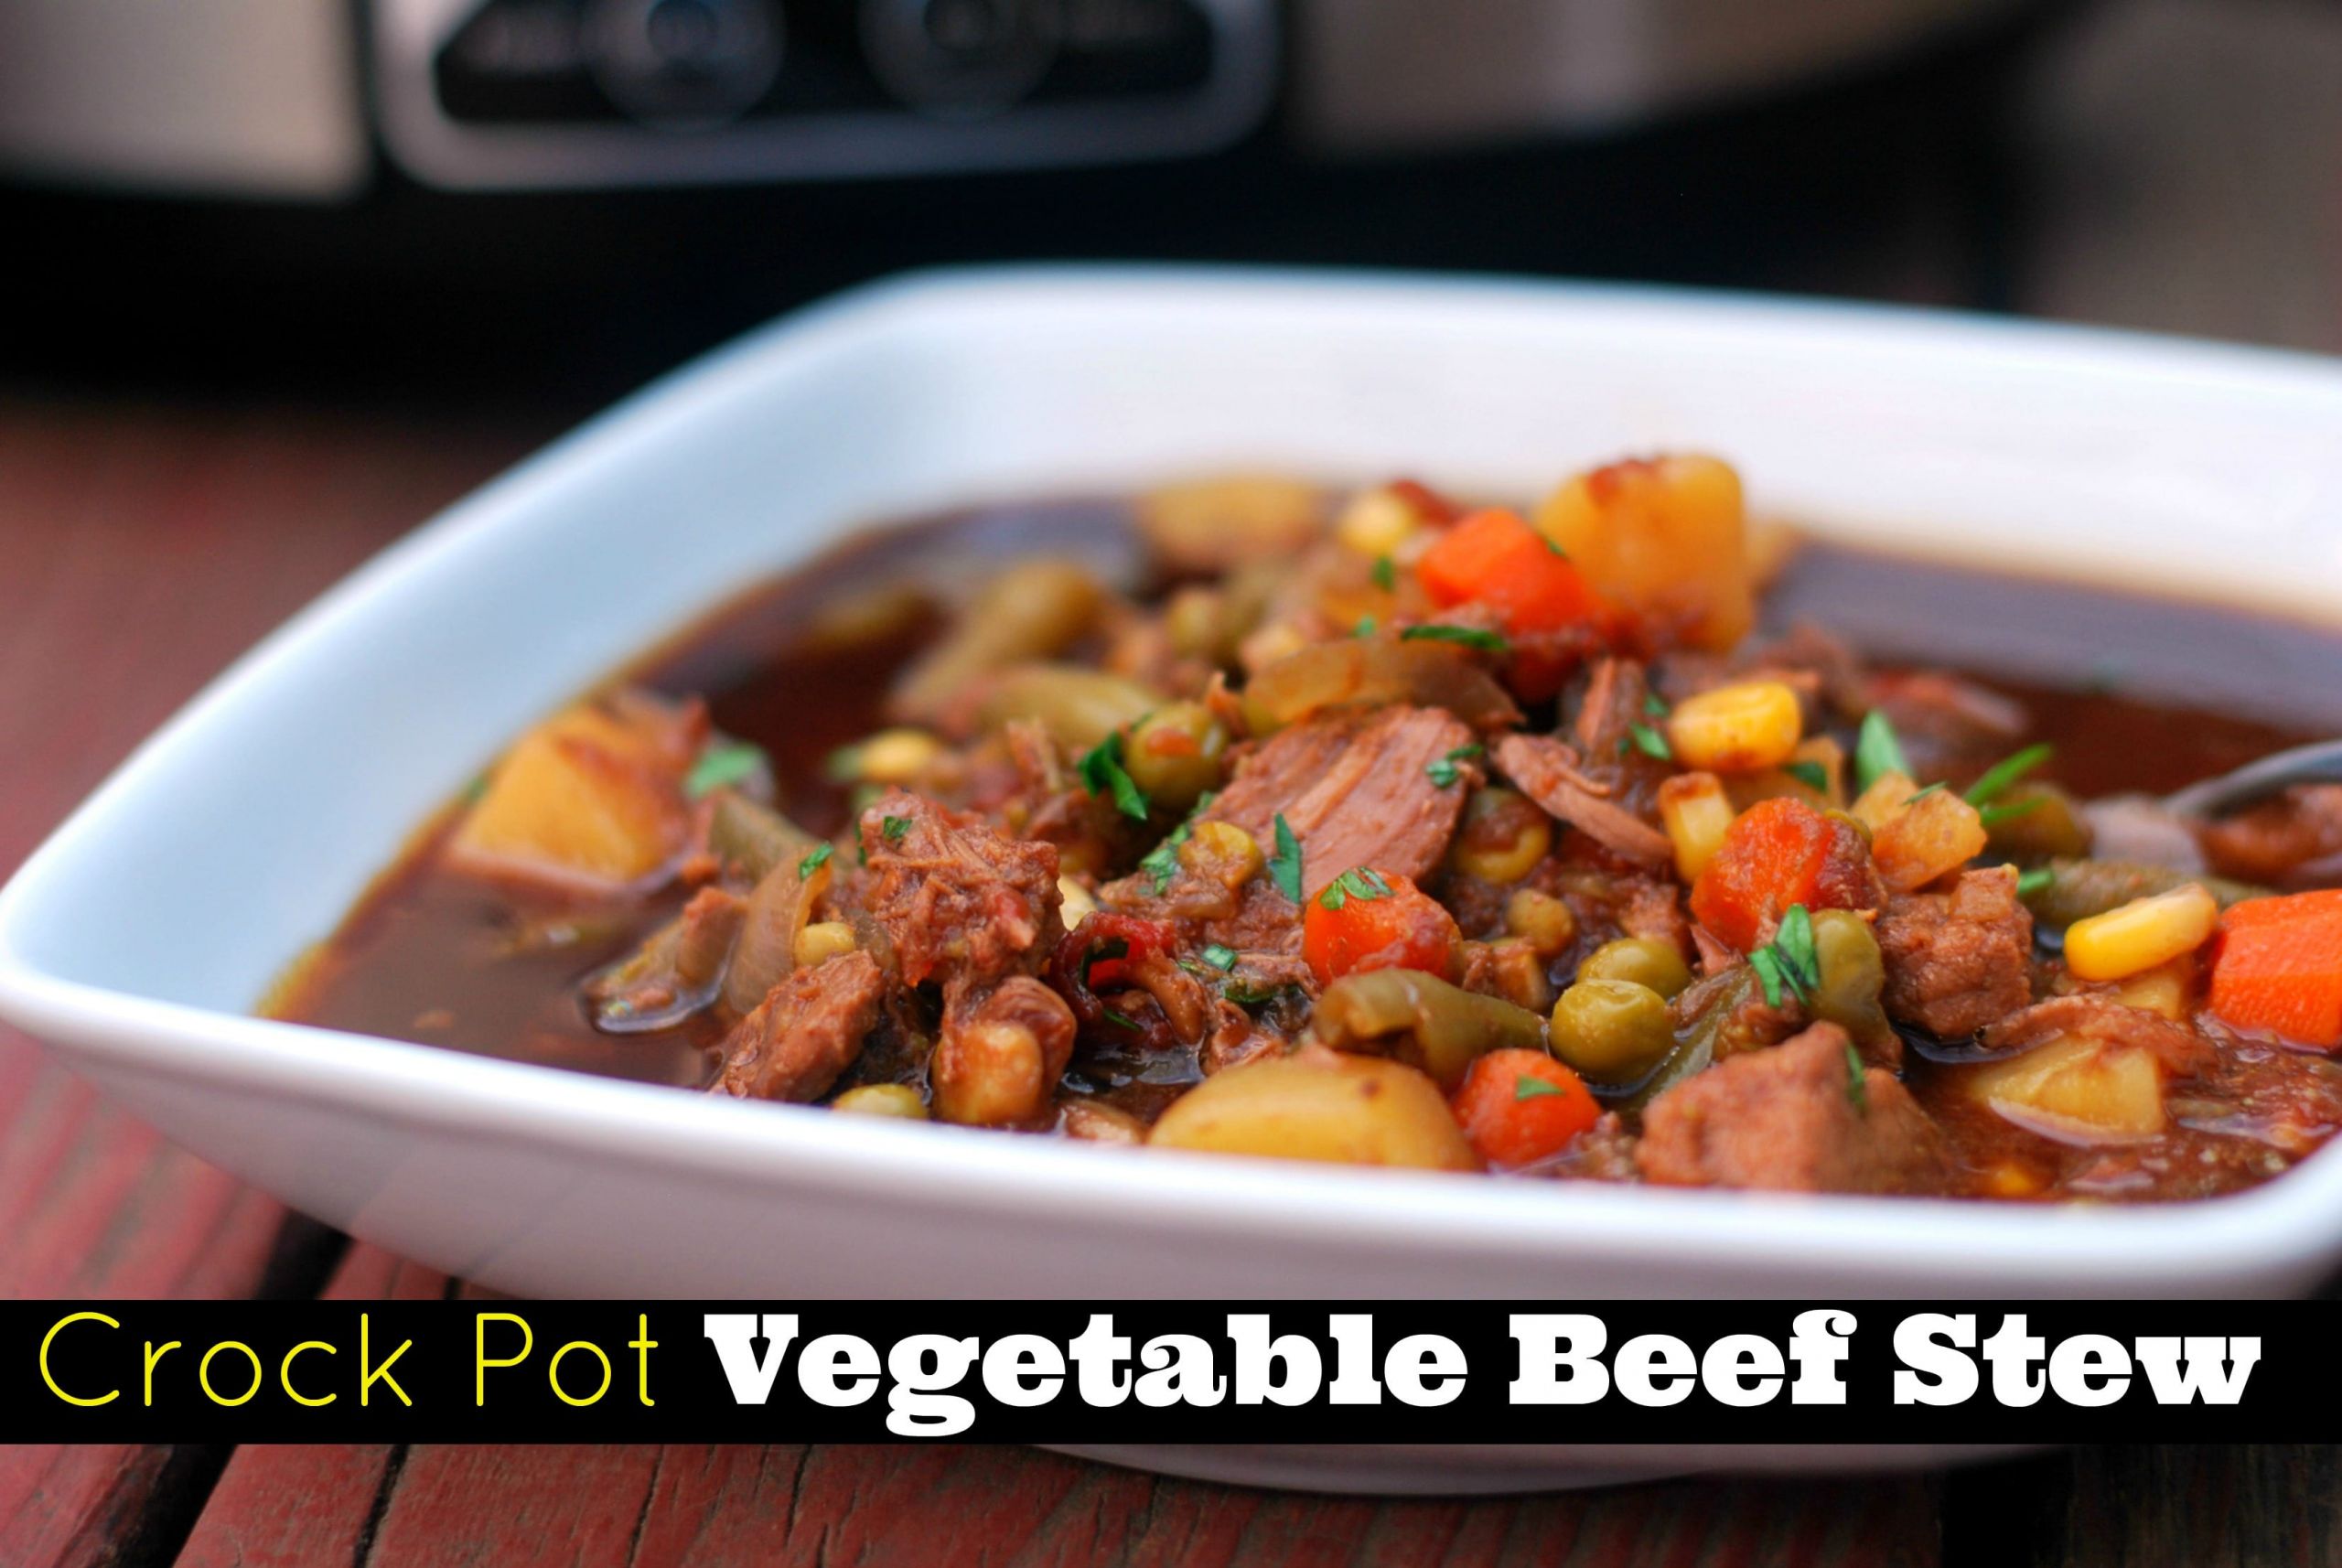 Crockpot Recipes For Beef Stew
 Crock Pot Ve able Beef Stew Aunt Bee s Recipes